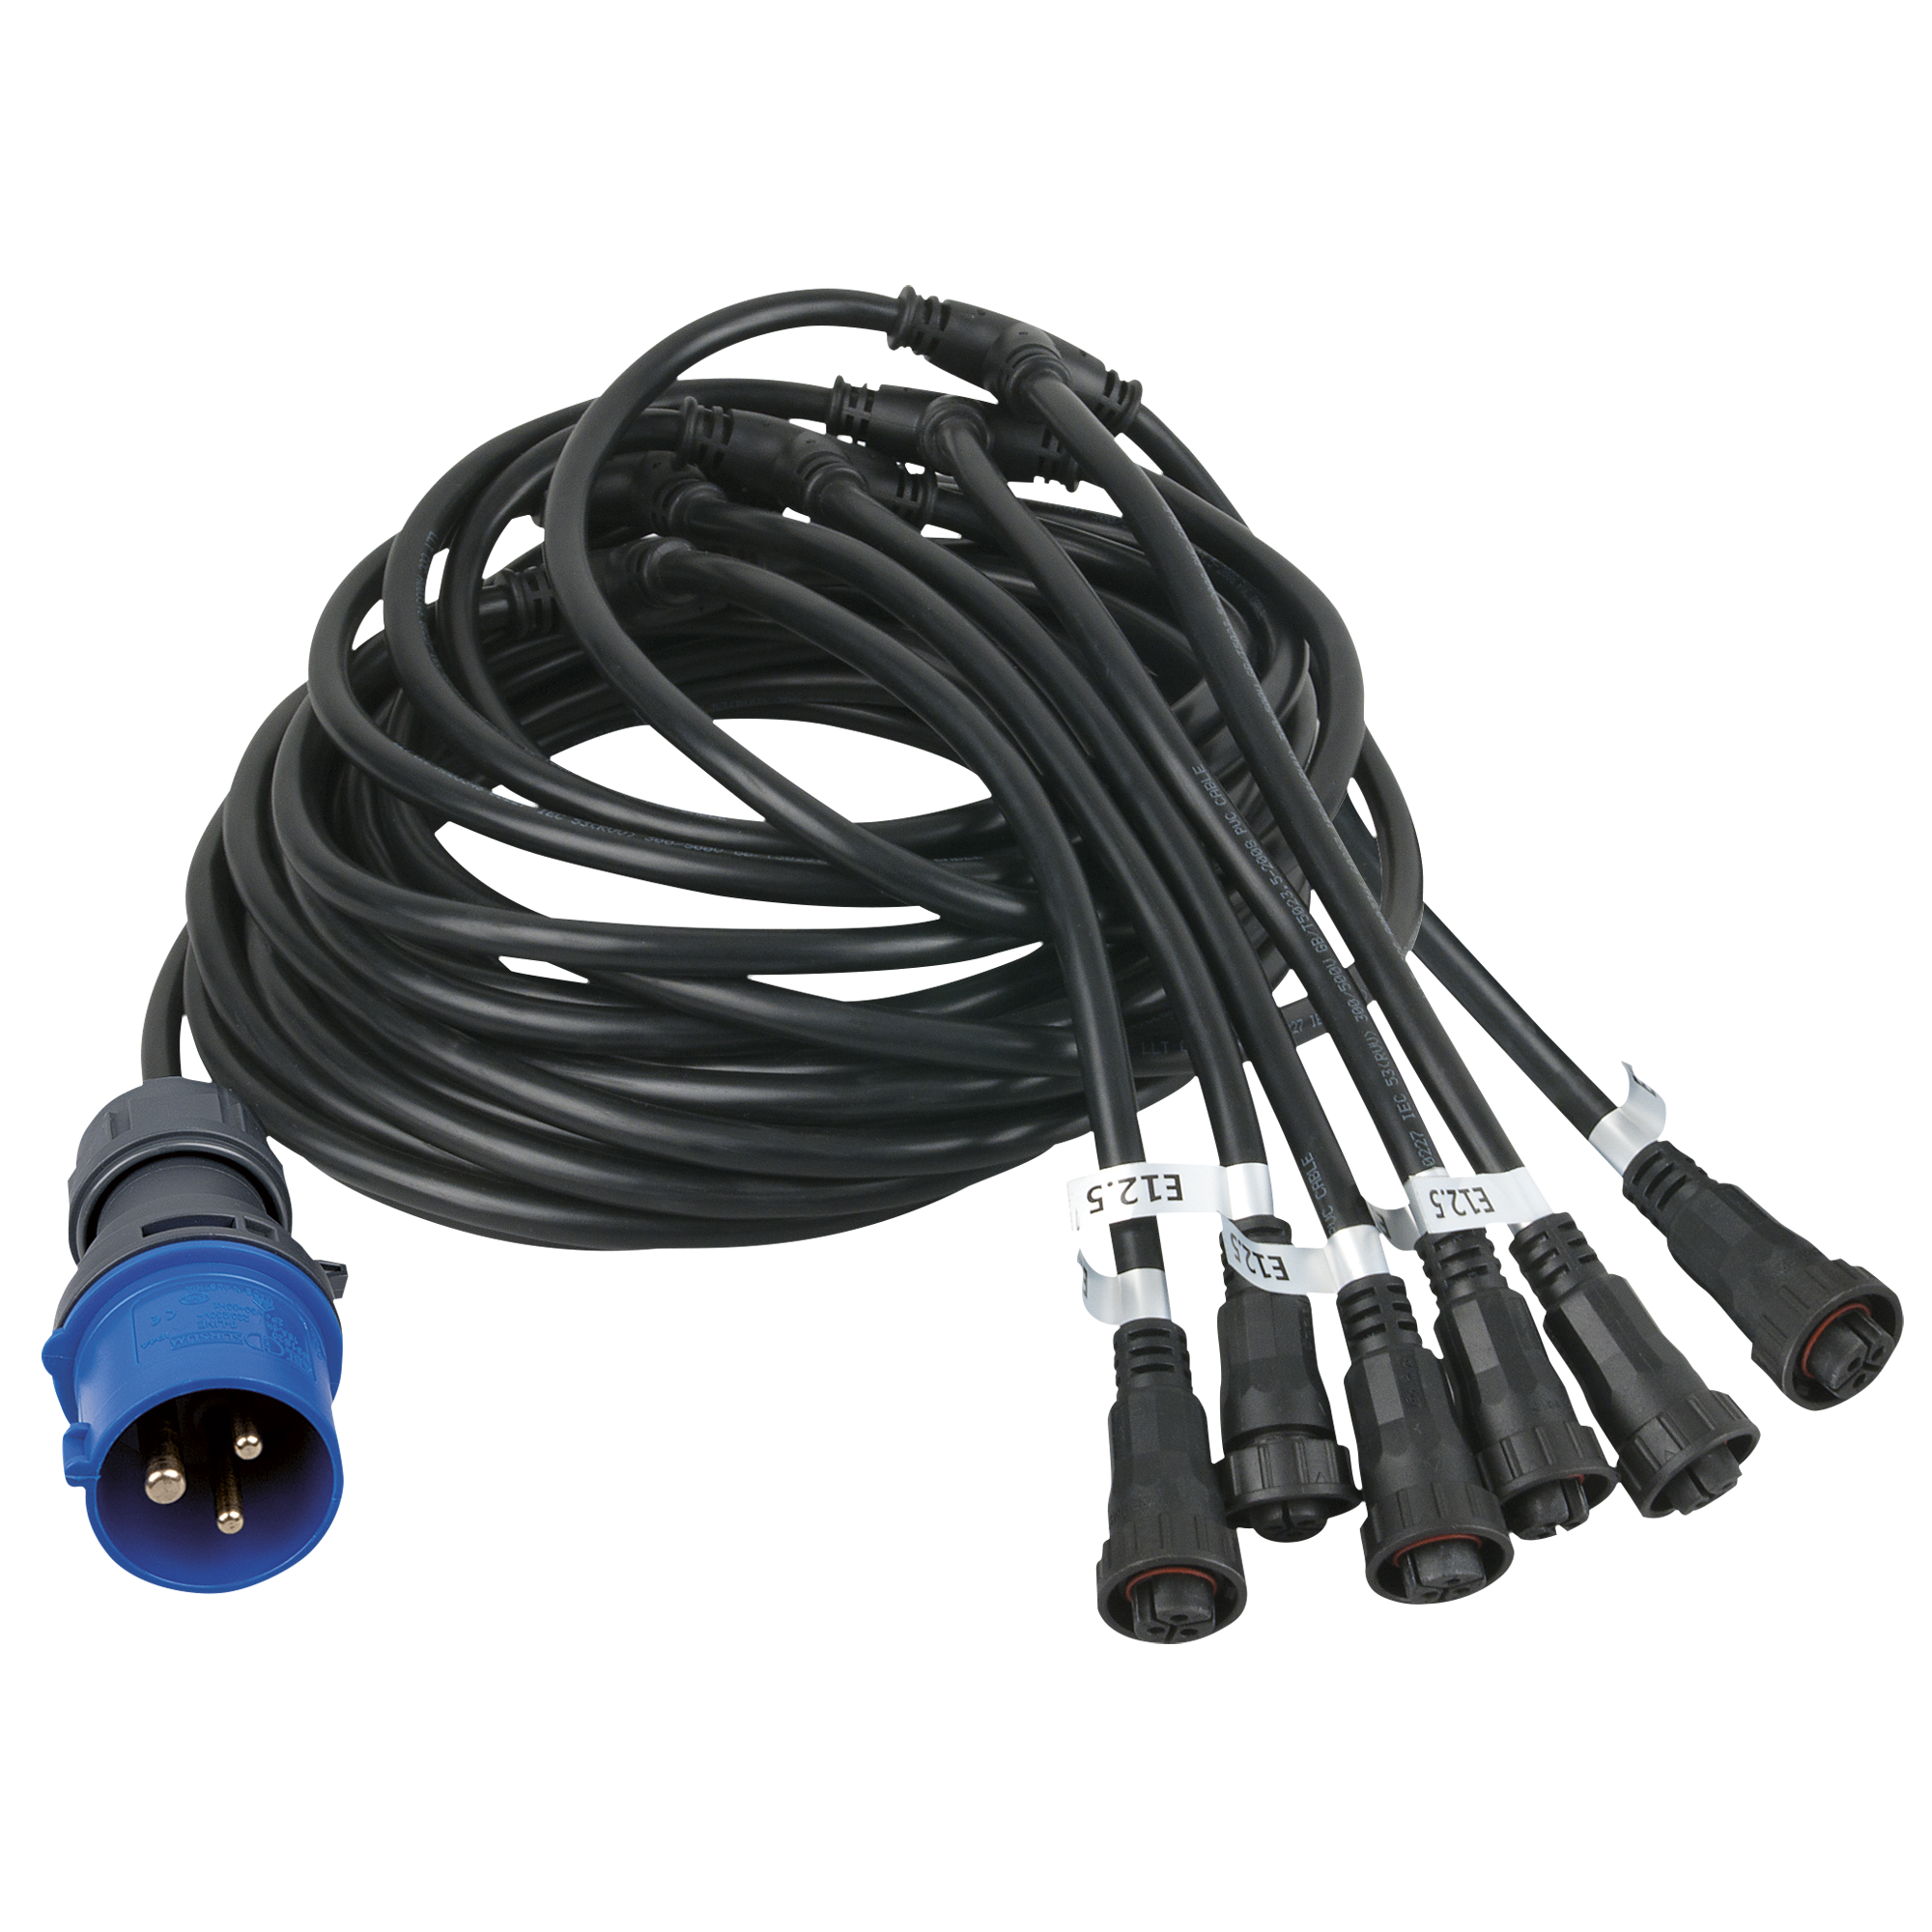 Power Cable for E/F Series Split - Onlinediscowinkel.nl